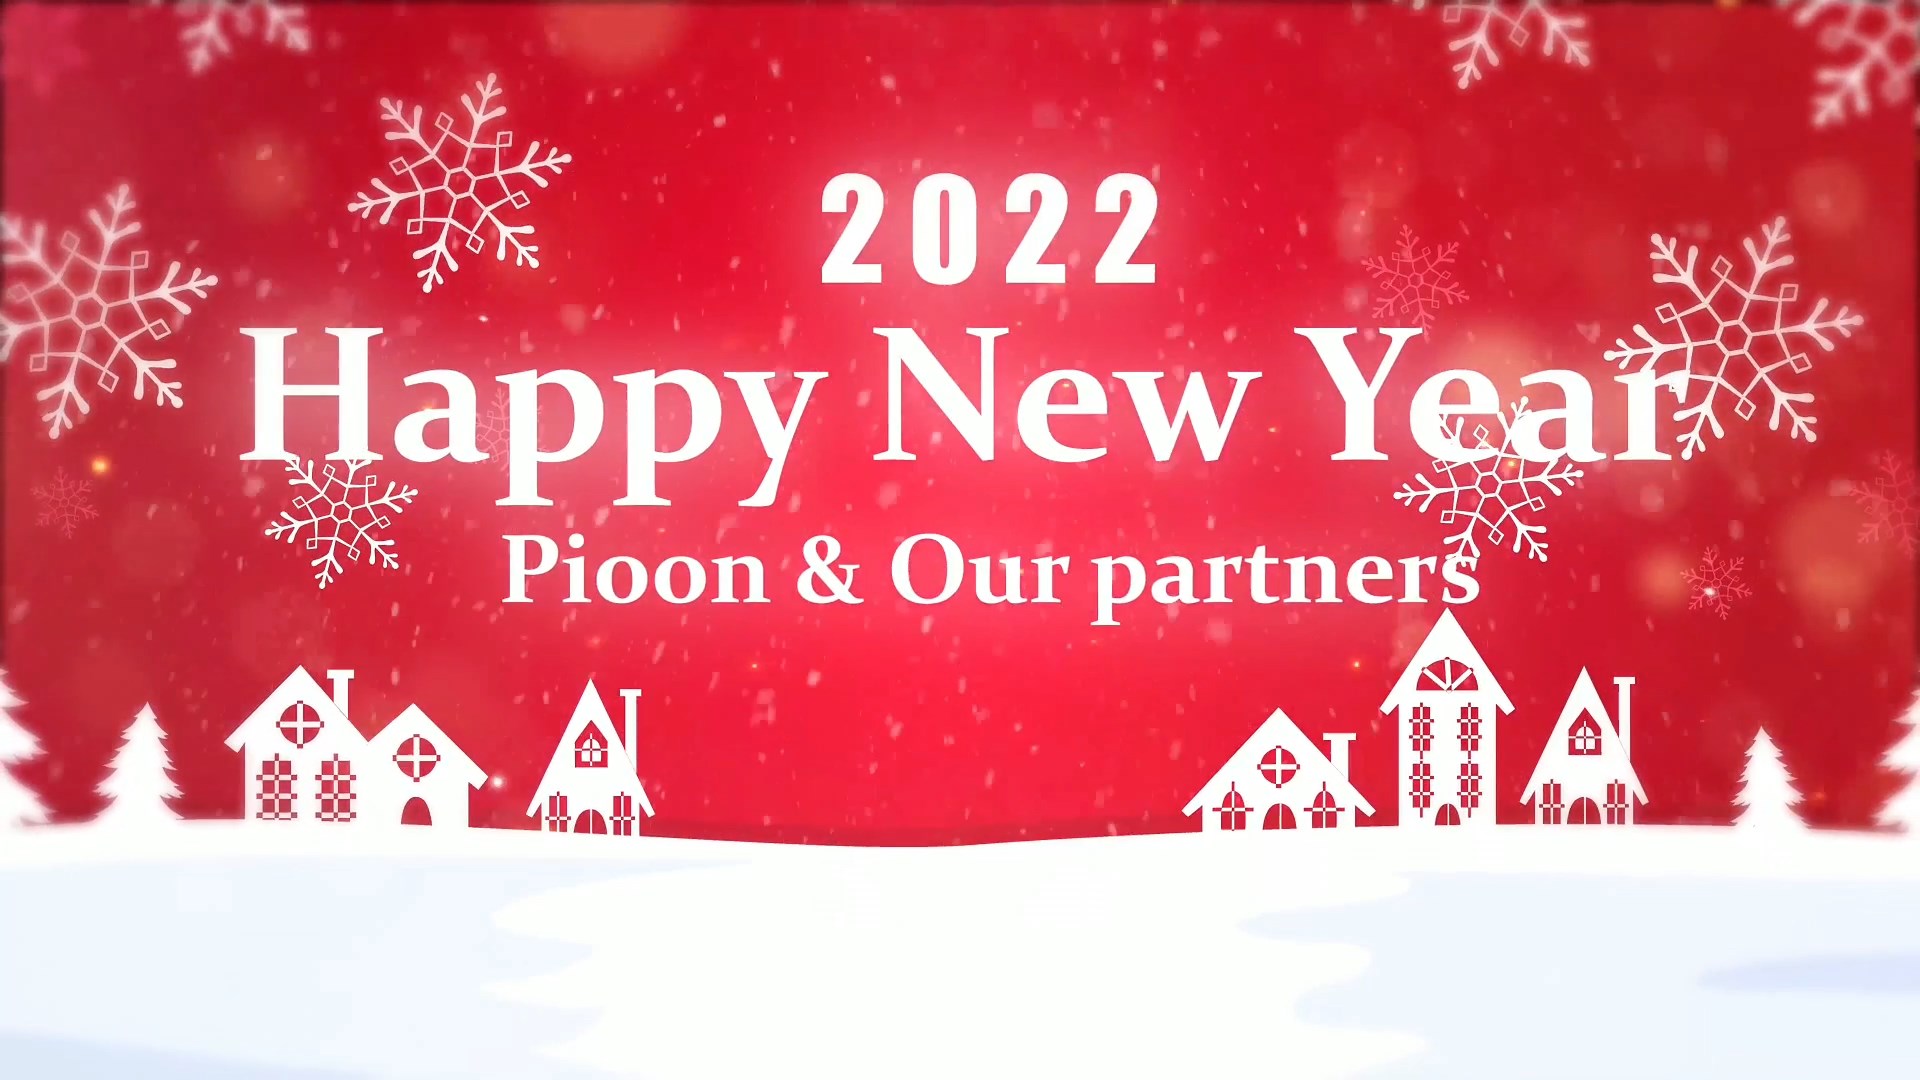 New Year wishes from Pioon